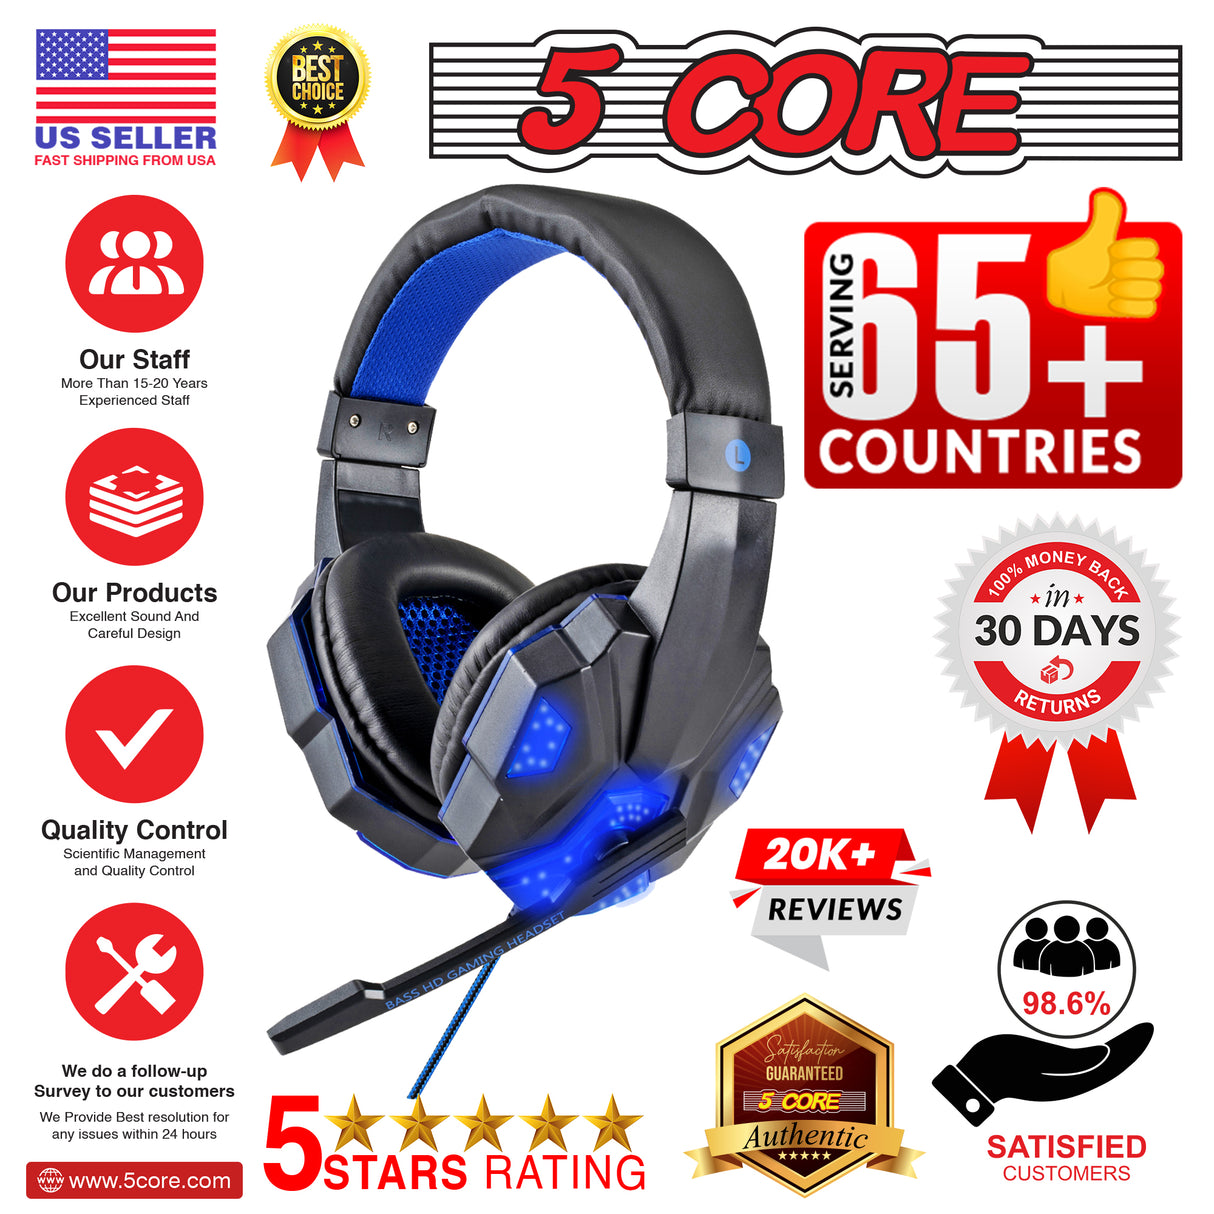 5 CORE Gaming Headset for PS4 PC One PS5 Console Controller, Noise Cancelling Microphone Over Ear Stereo Headphones with Mic, LED Light, Bass Surround, Earmuffs for Laptop Mac NES Games HDP GM1 B